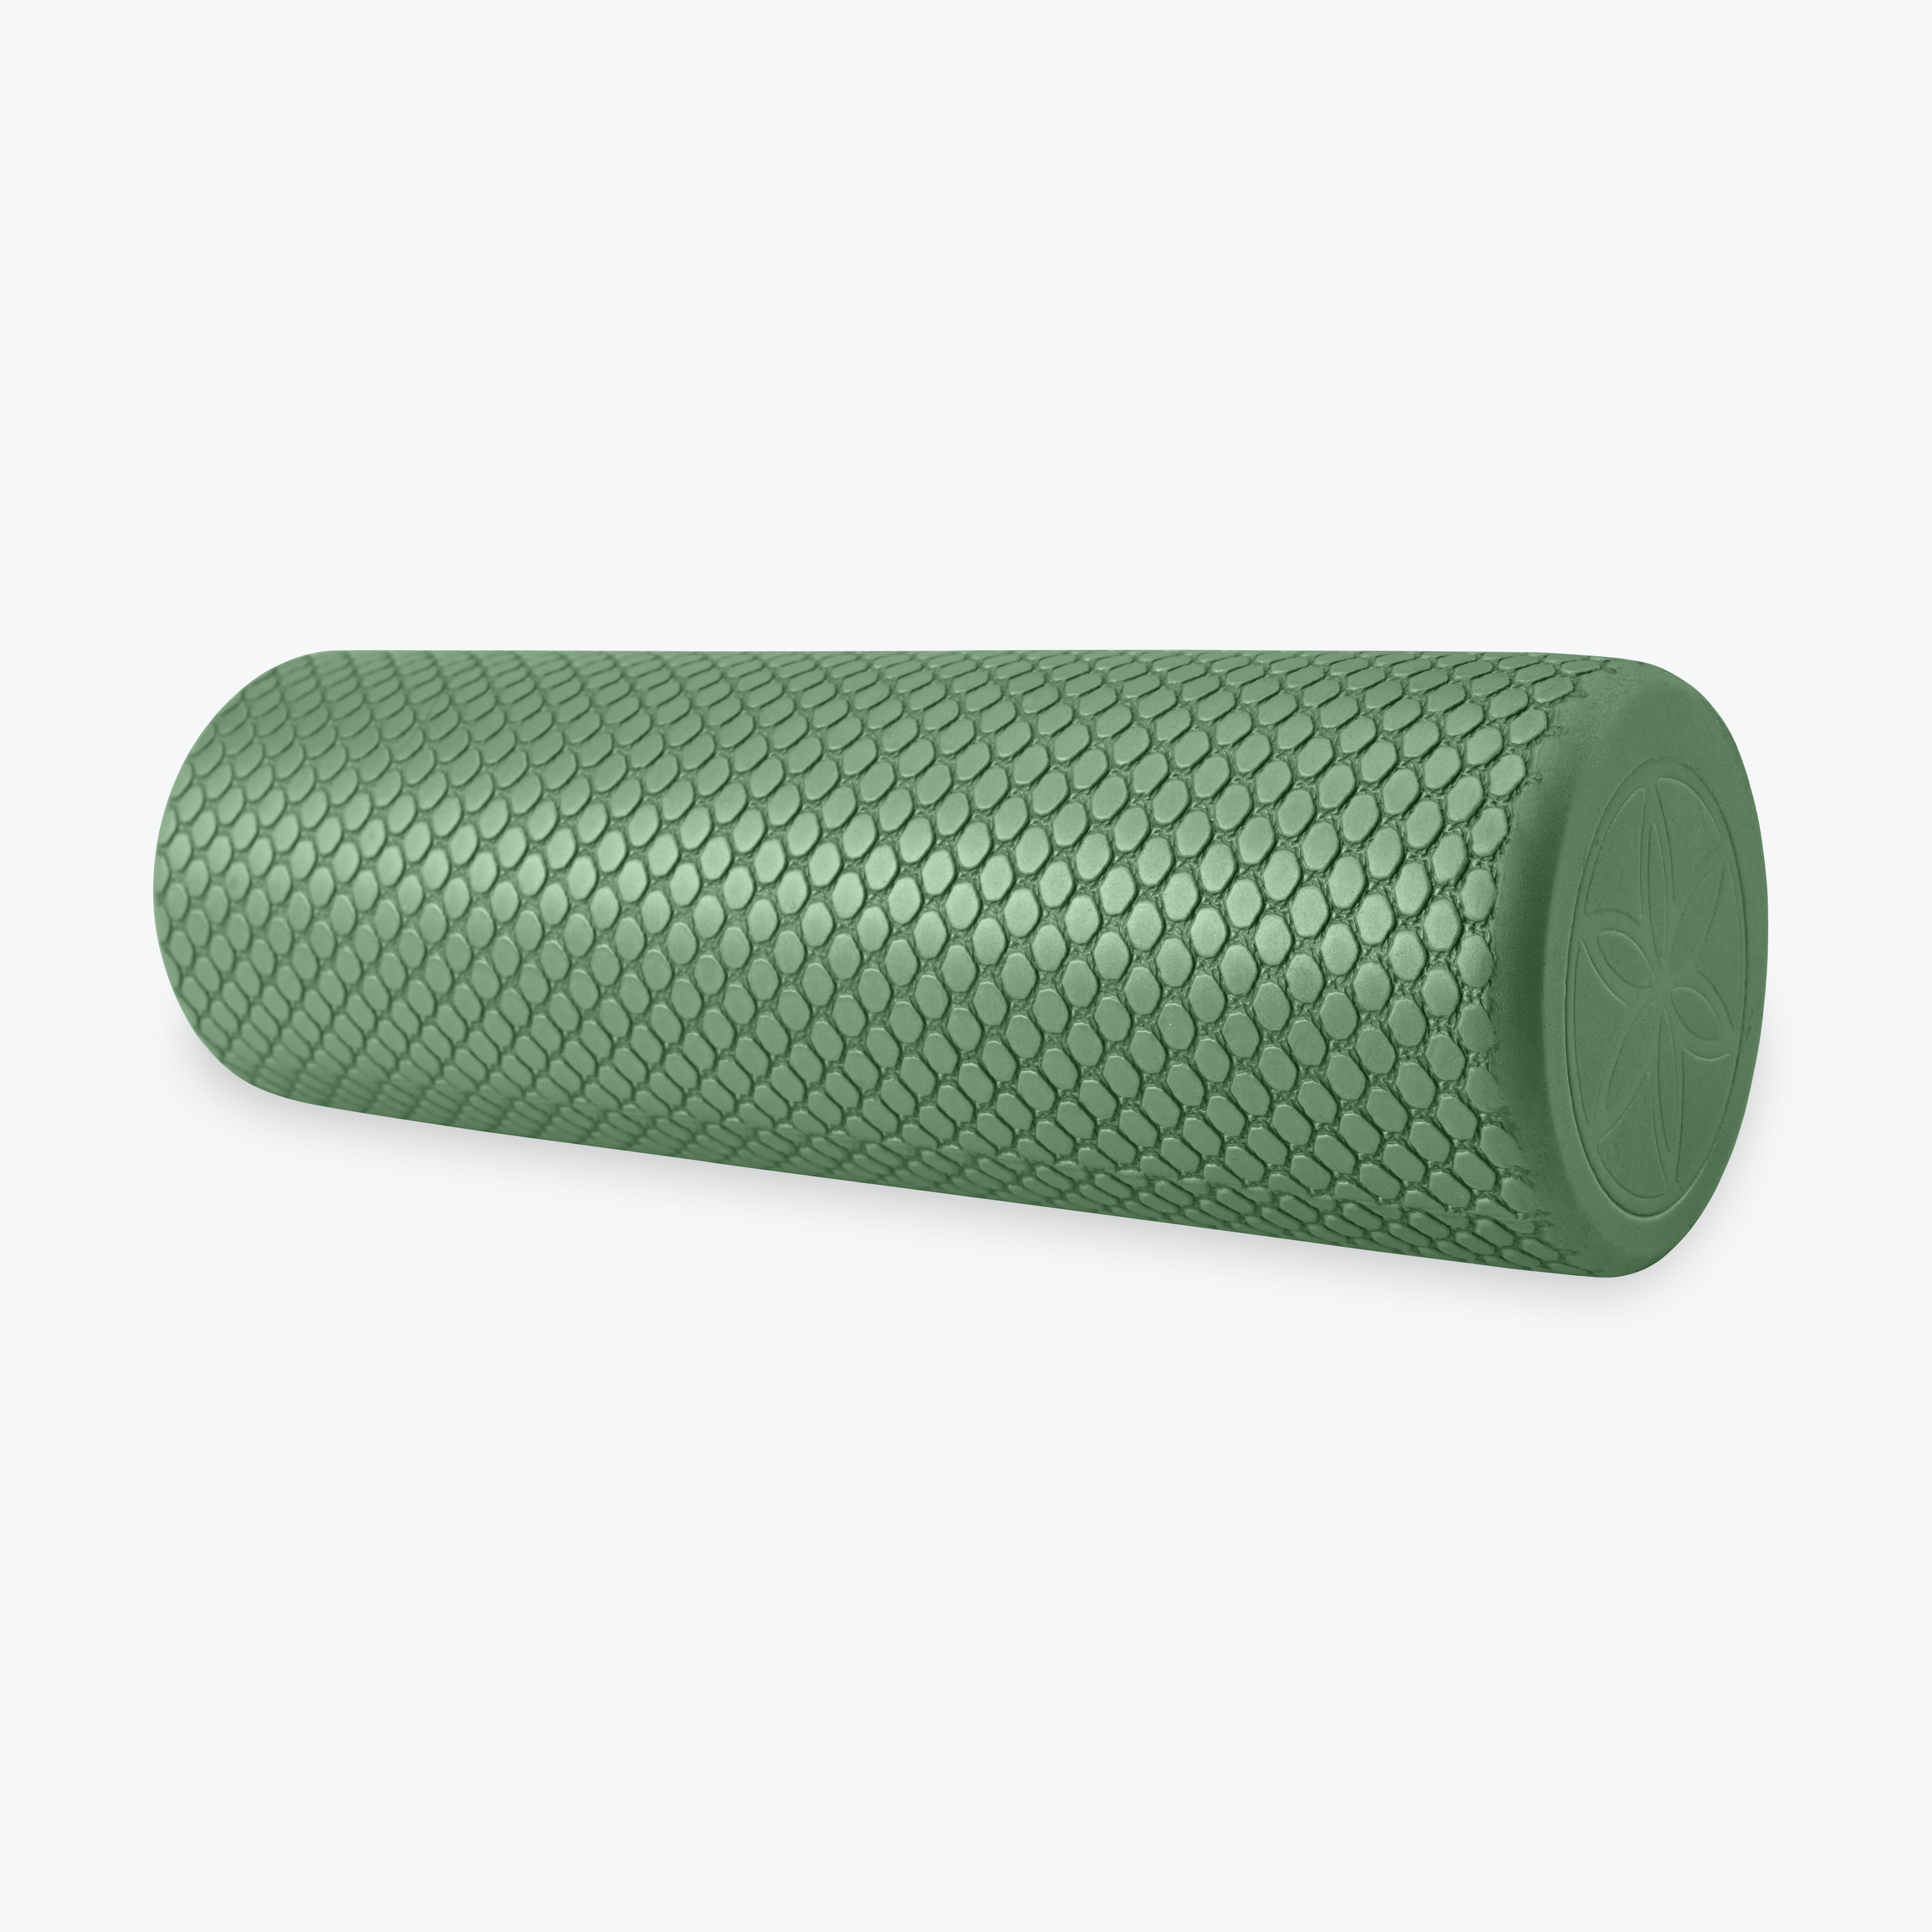 Gaiam Restore Compact Foam Roller - New Color - image 3 of 3